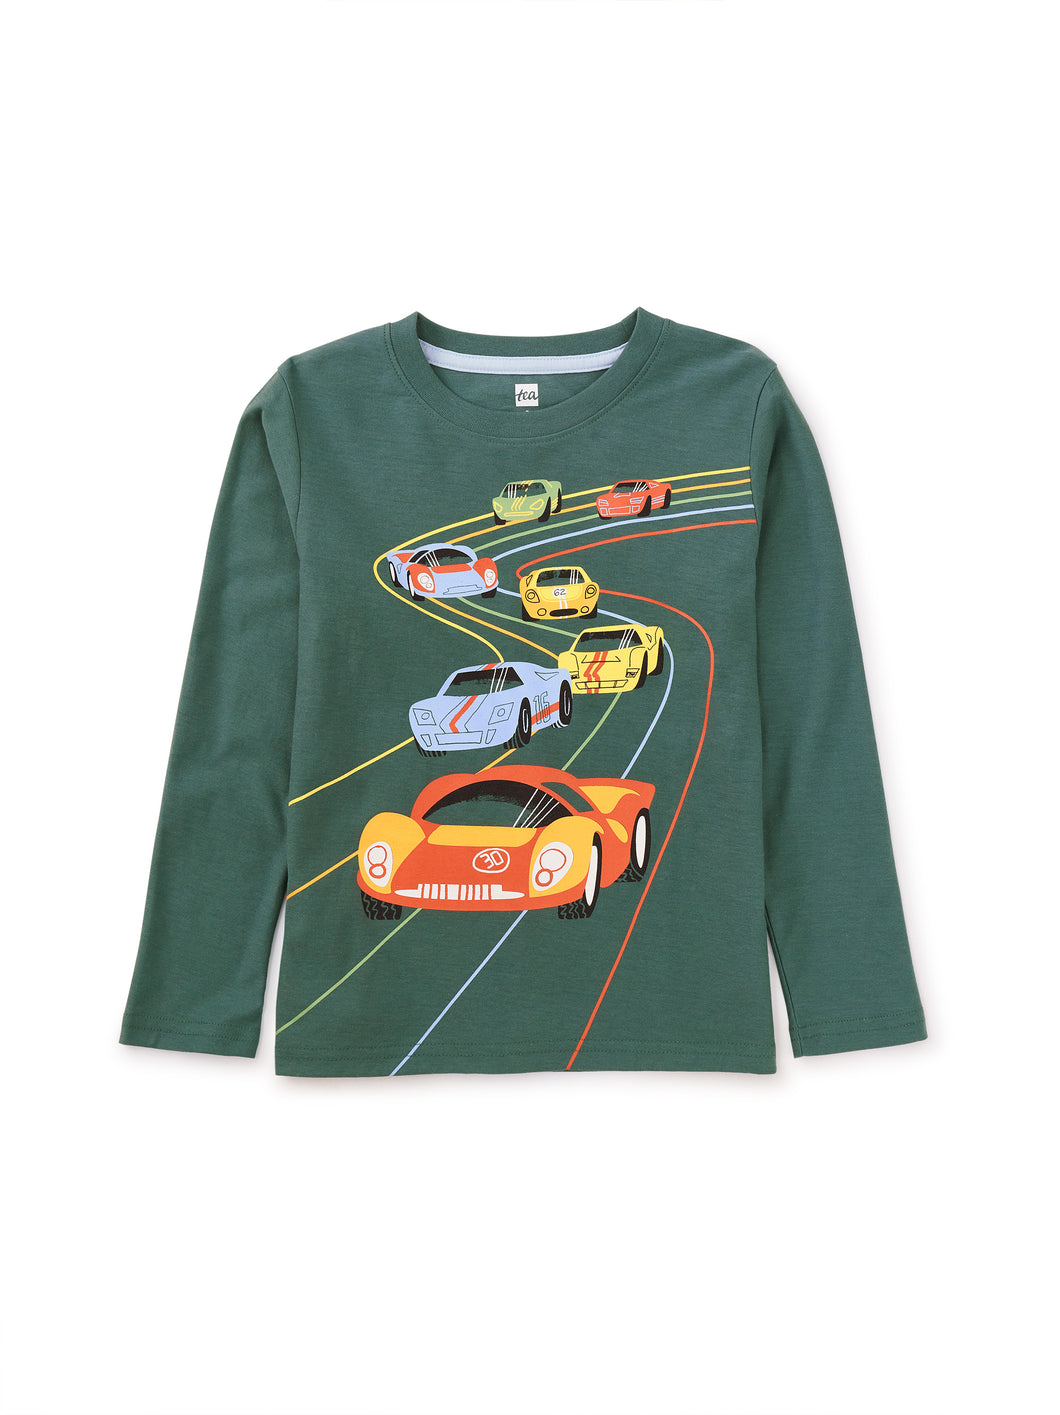 Silver Pine Le Mans Race Graphic Tee